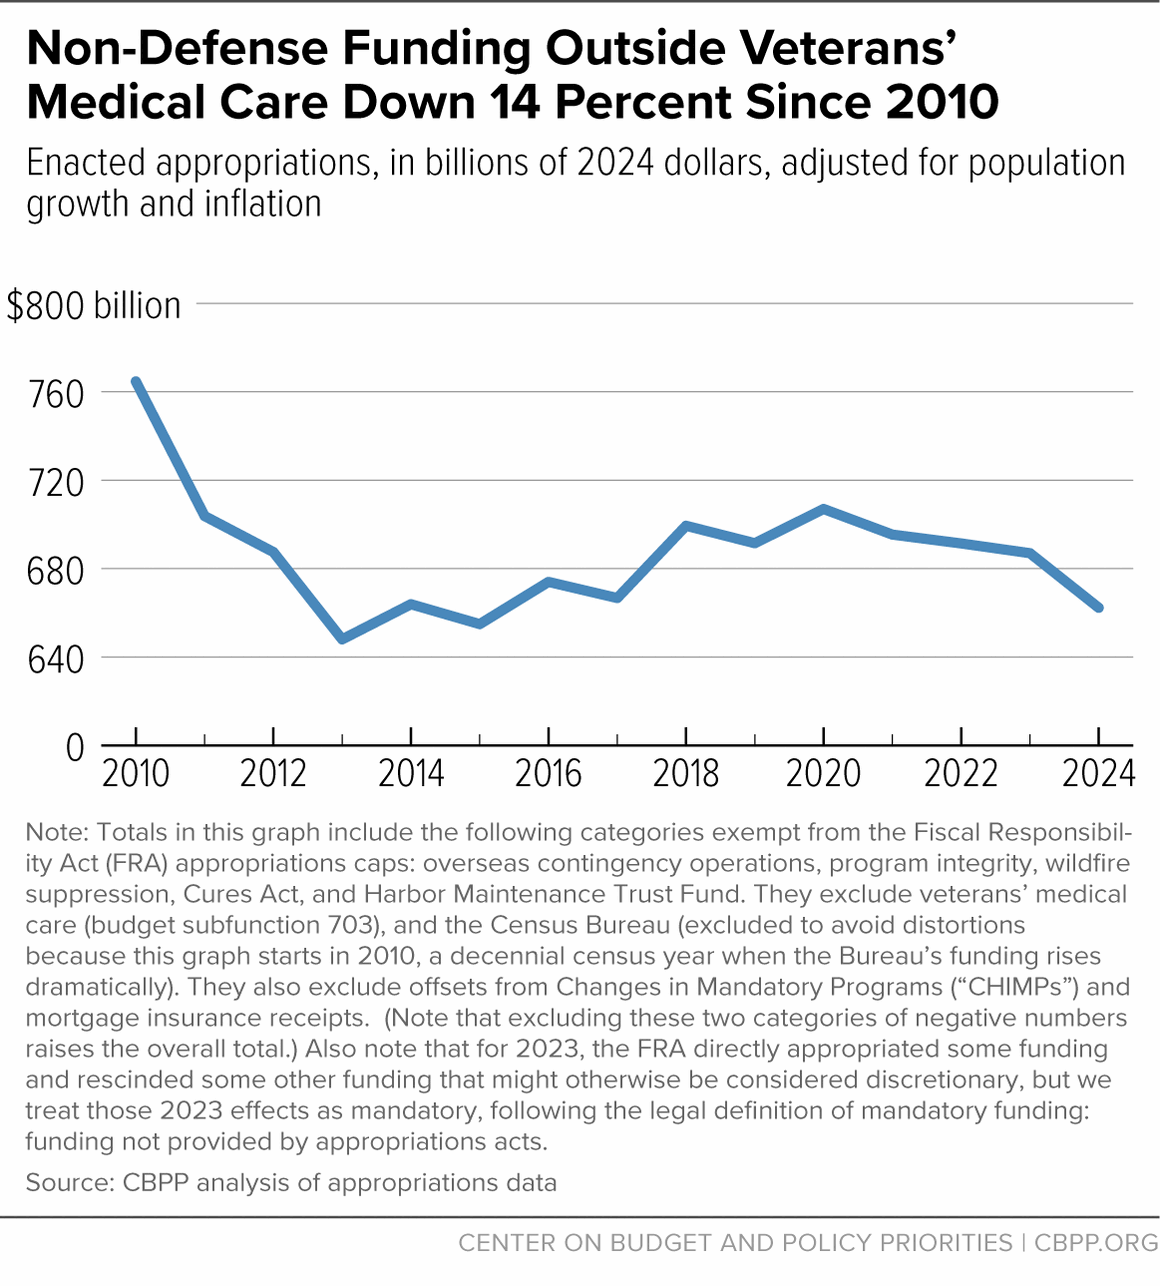 Non-Defense Funding Outside Veterans' Medical Care Down 14 Percent Since 2010